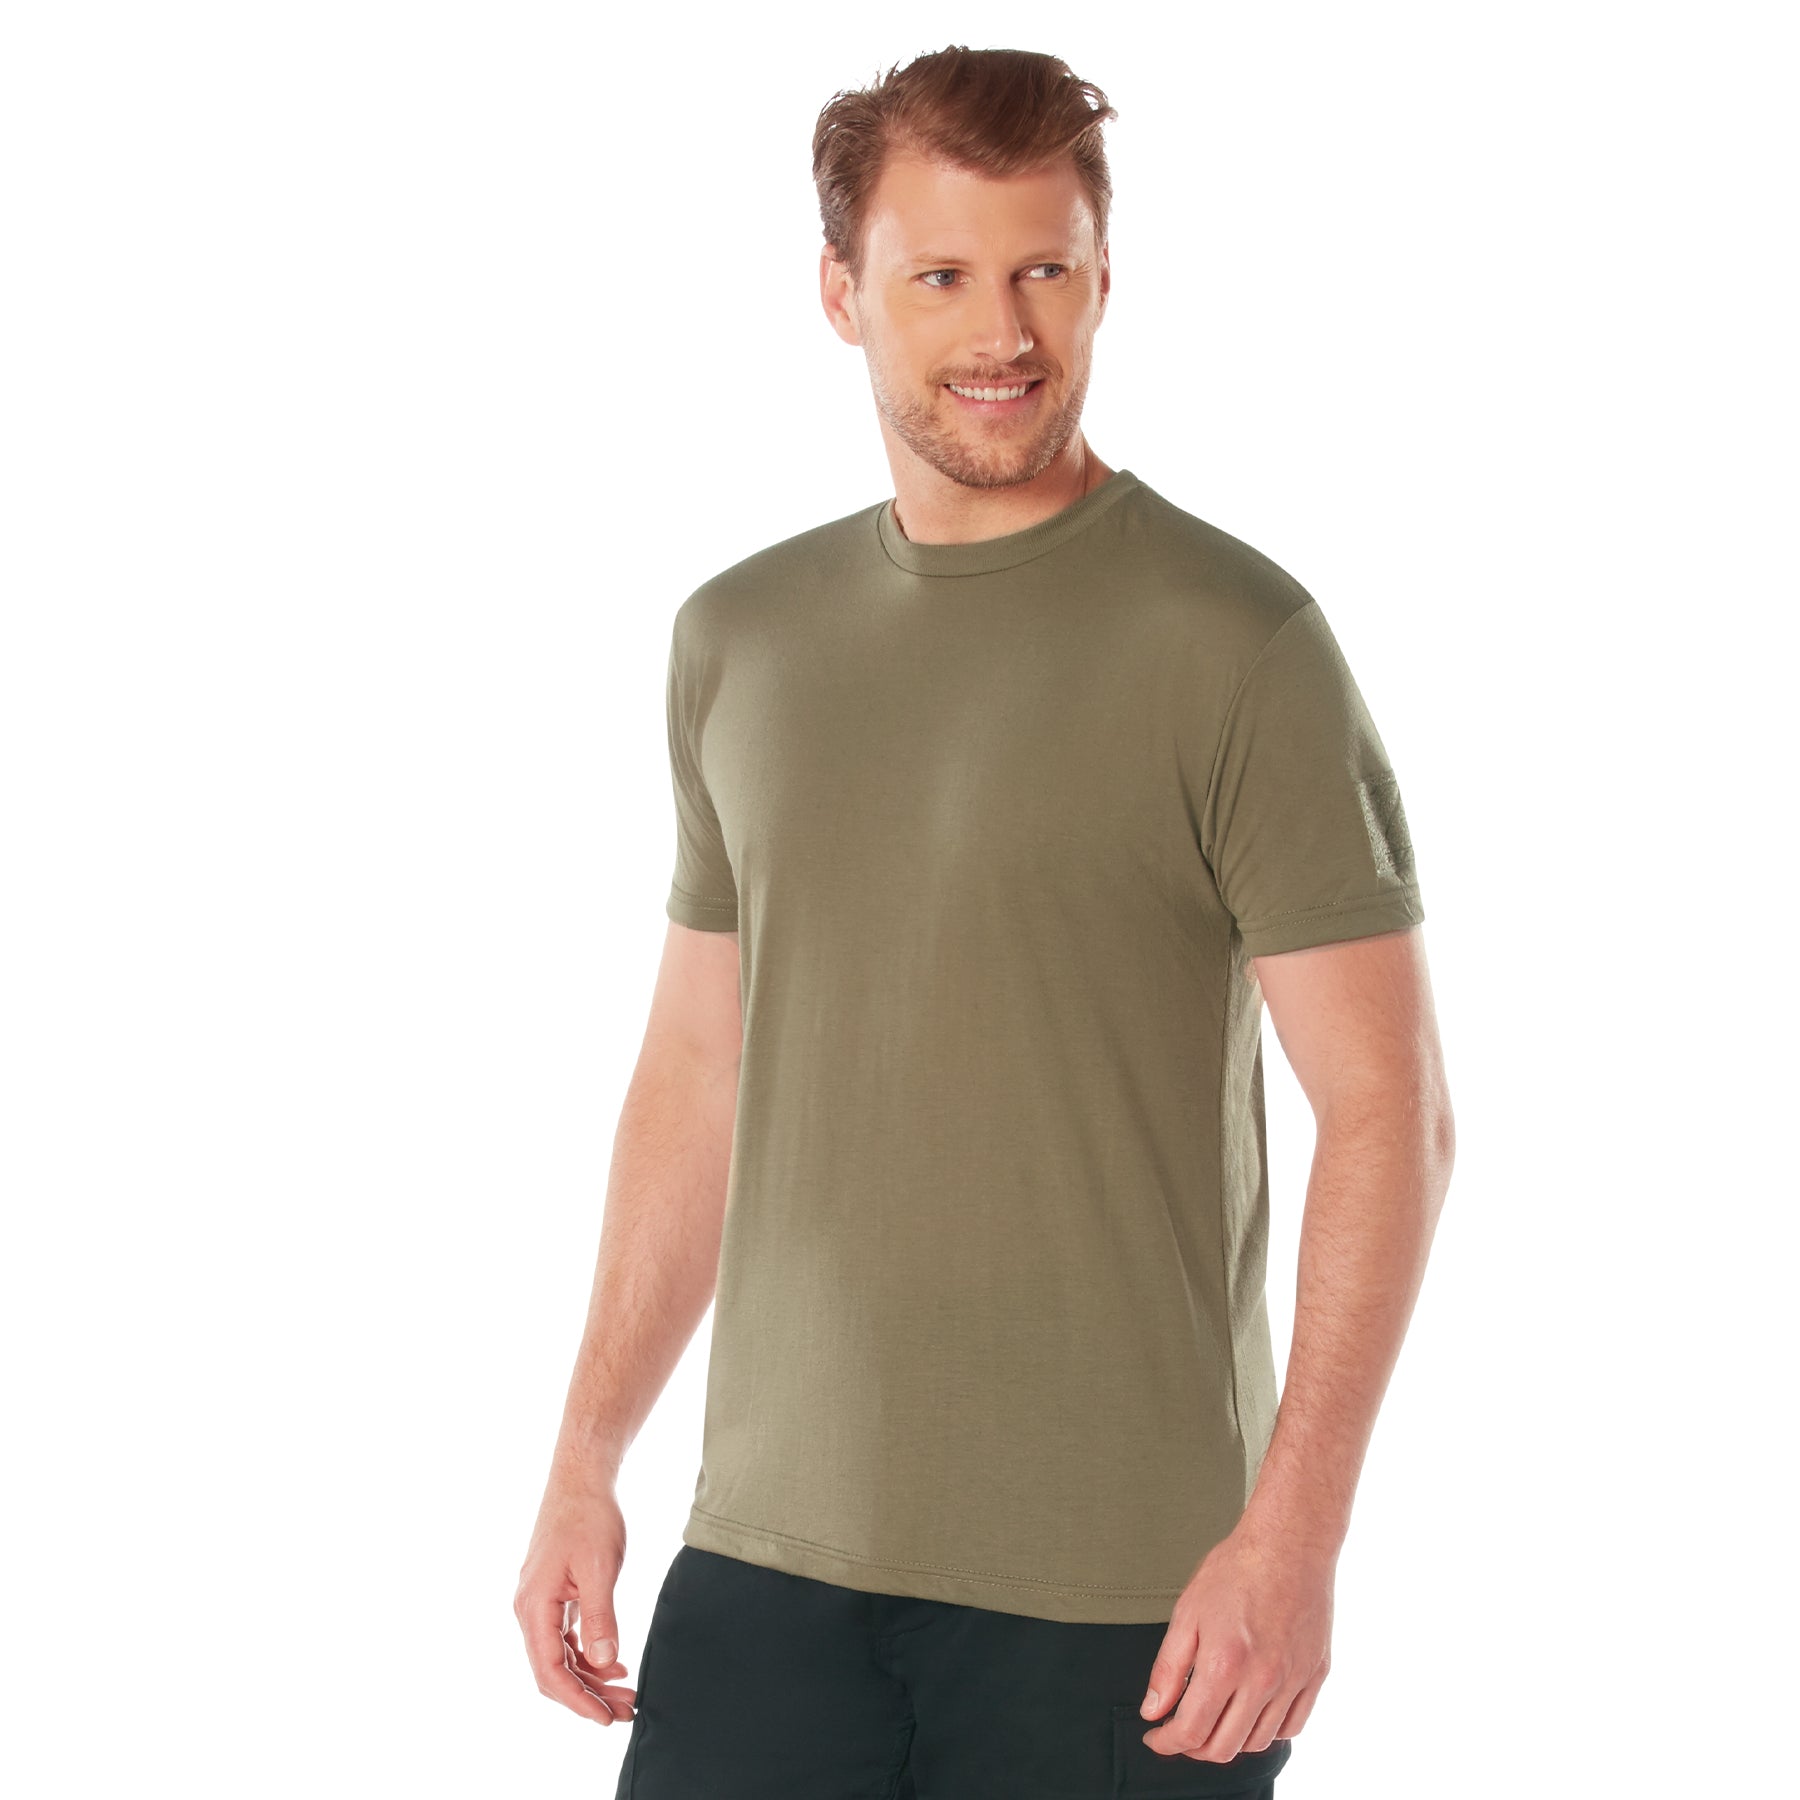 [AR 670-1] Poly Moisture Wicking Athletic Fit T-Shirts